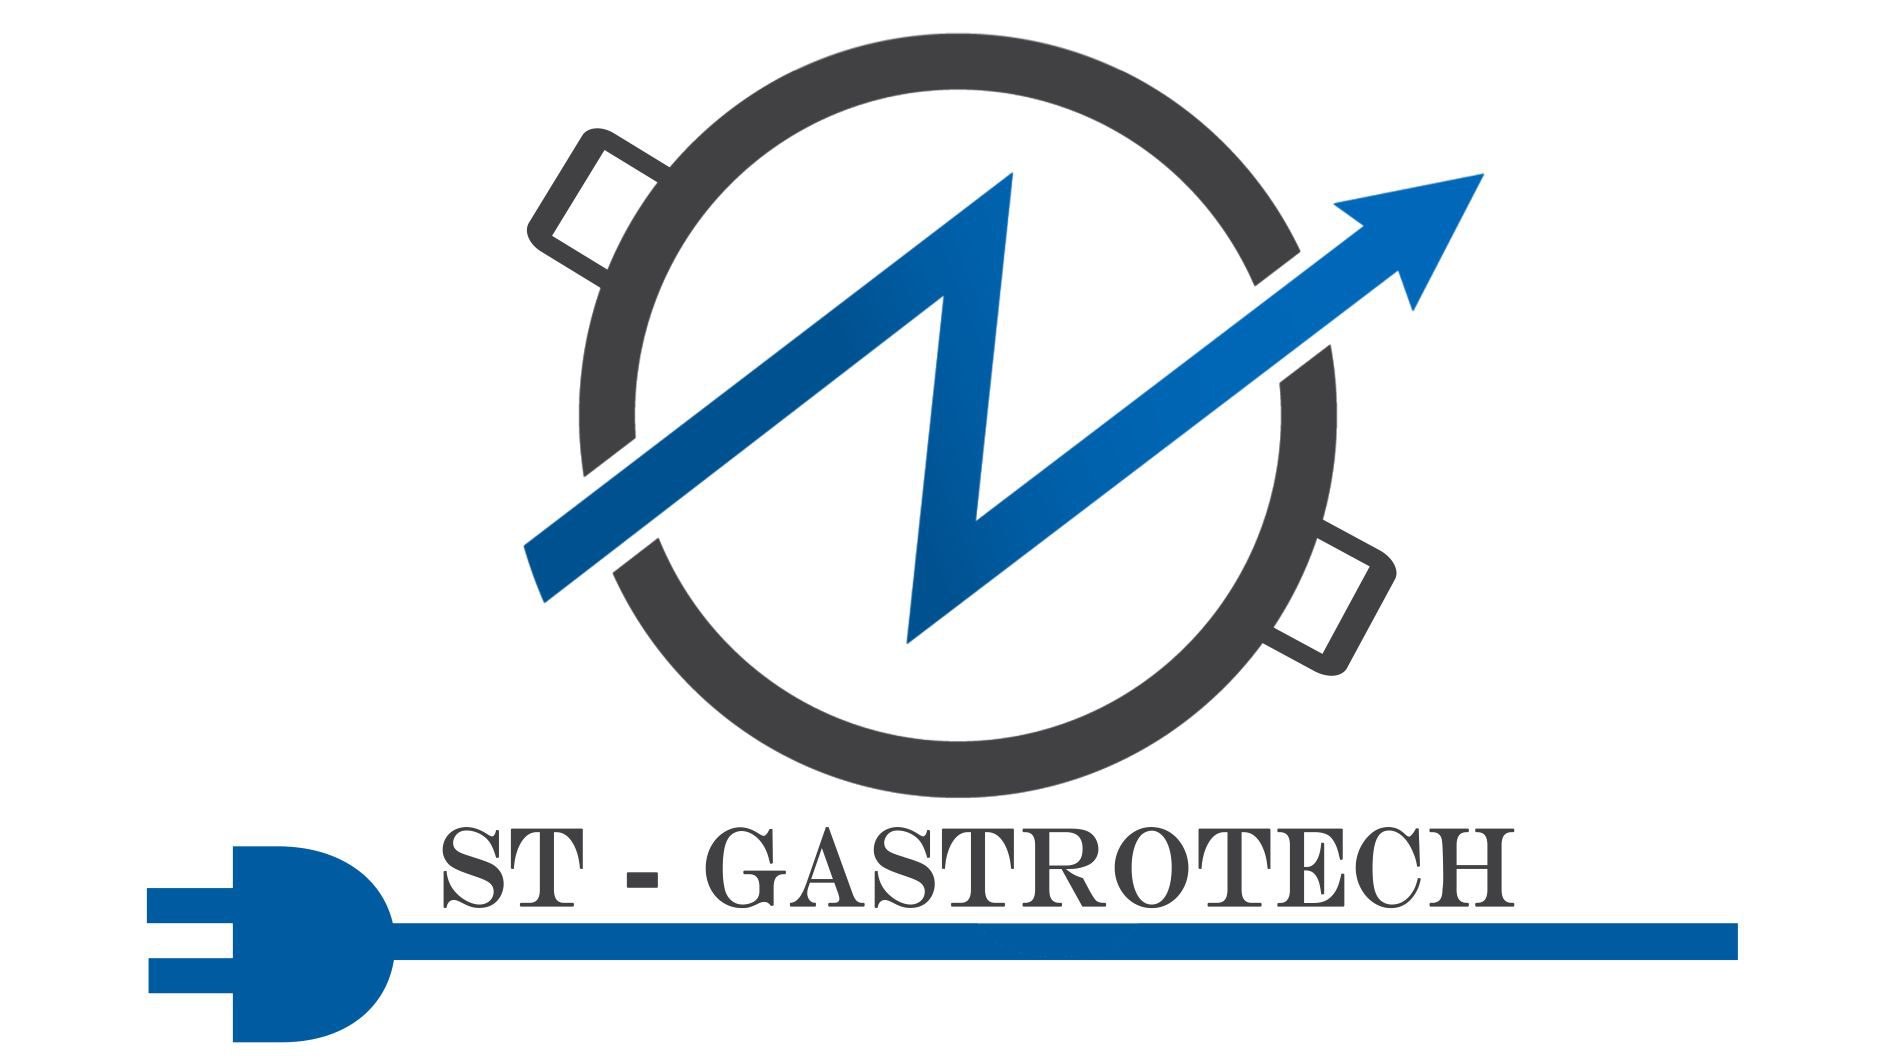 ST-Gastrotech